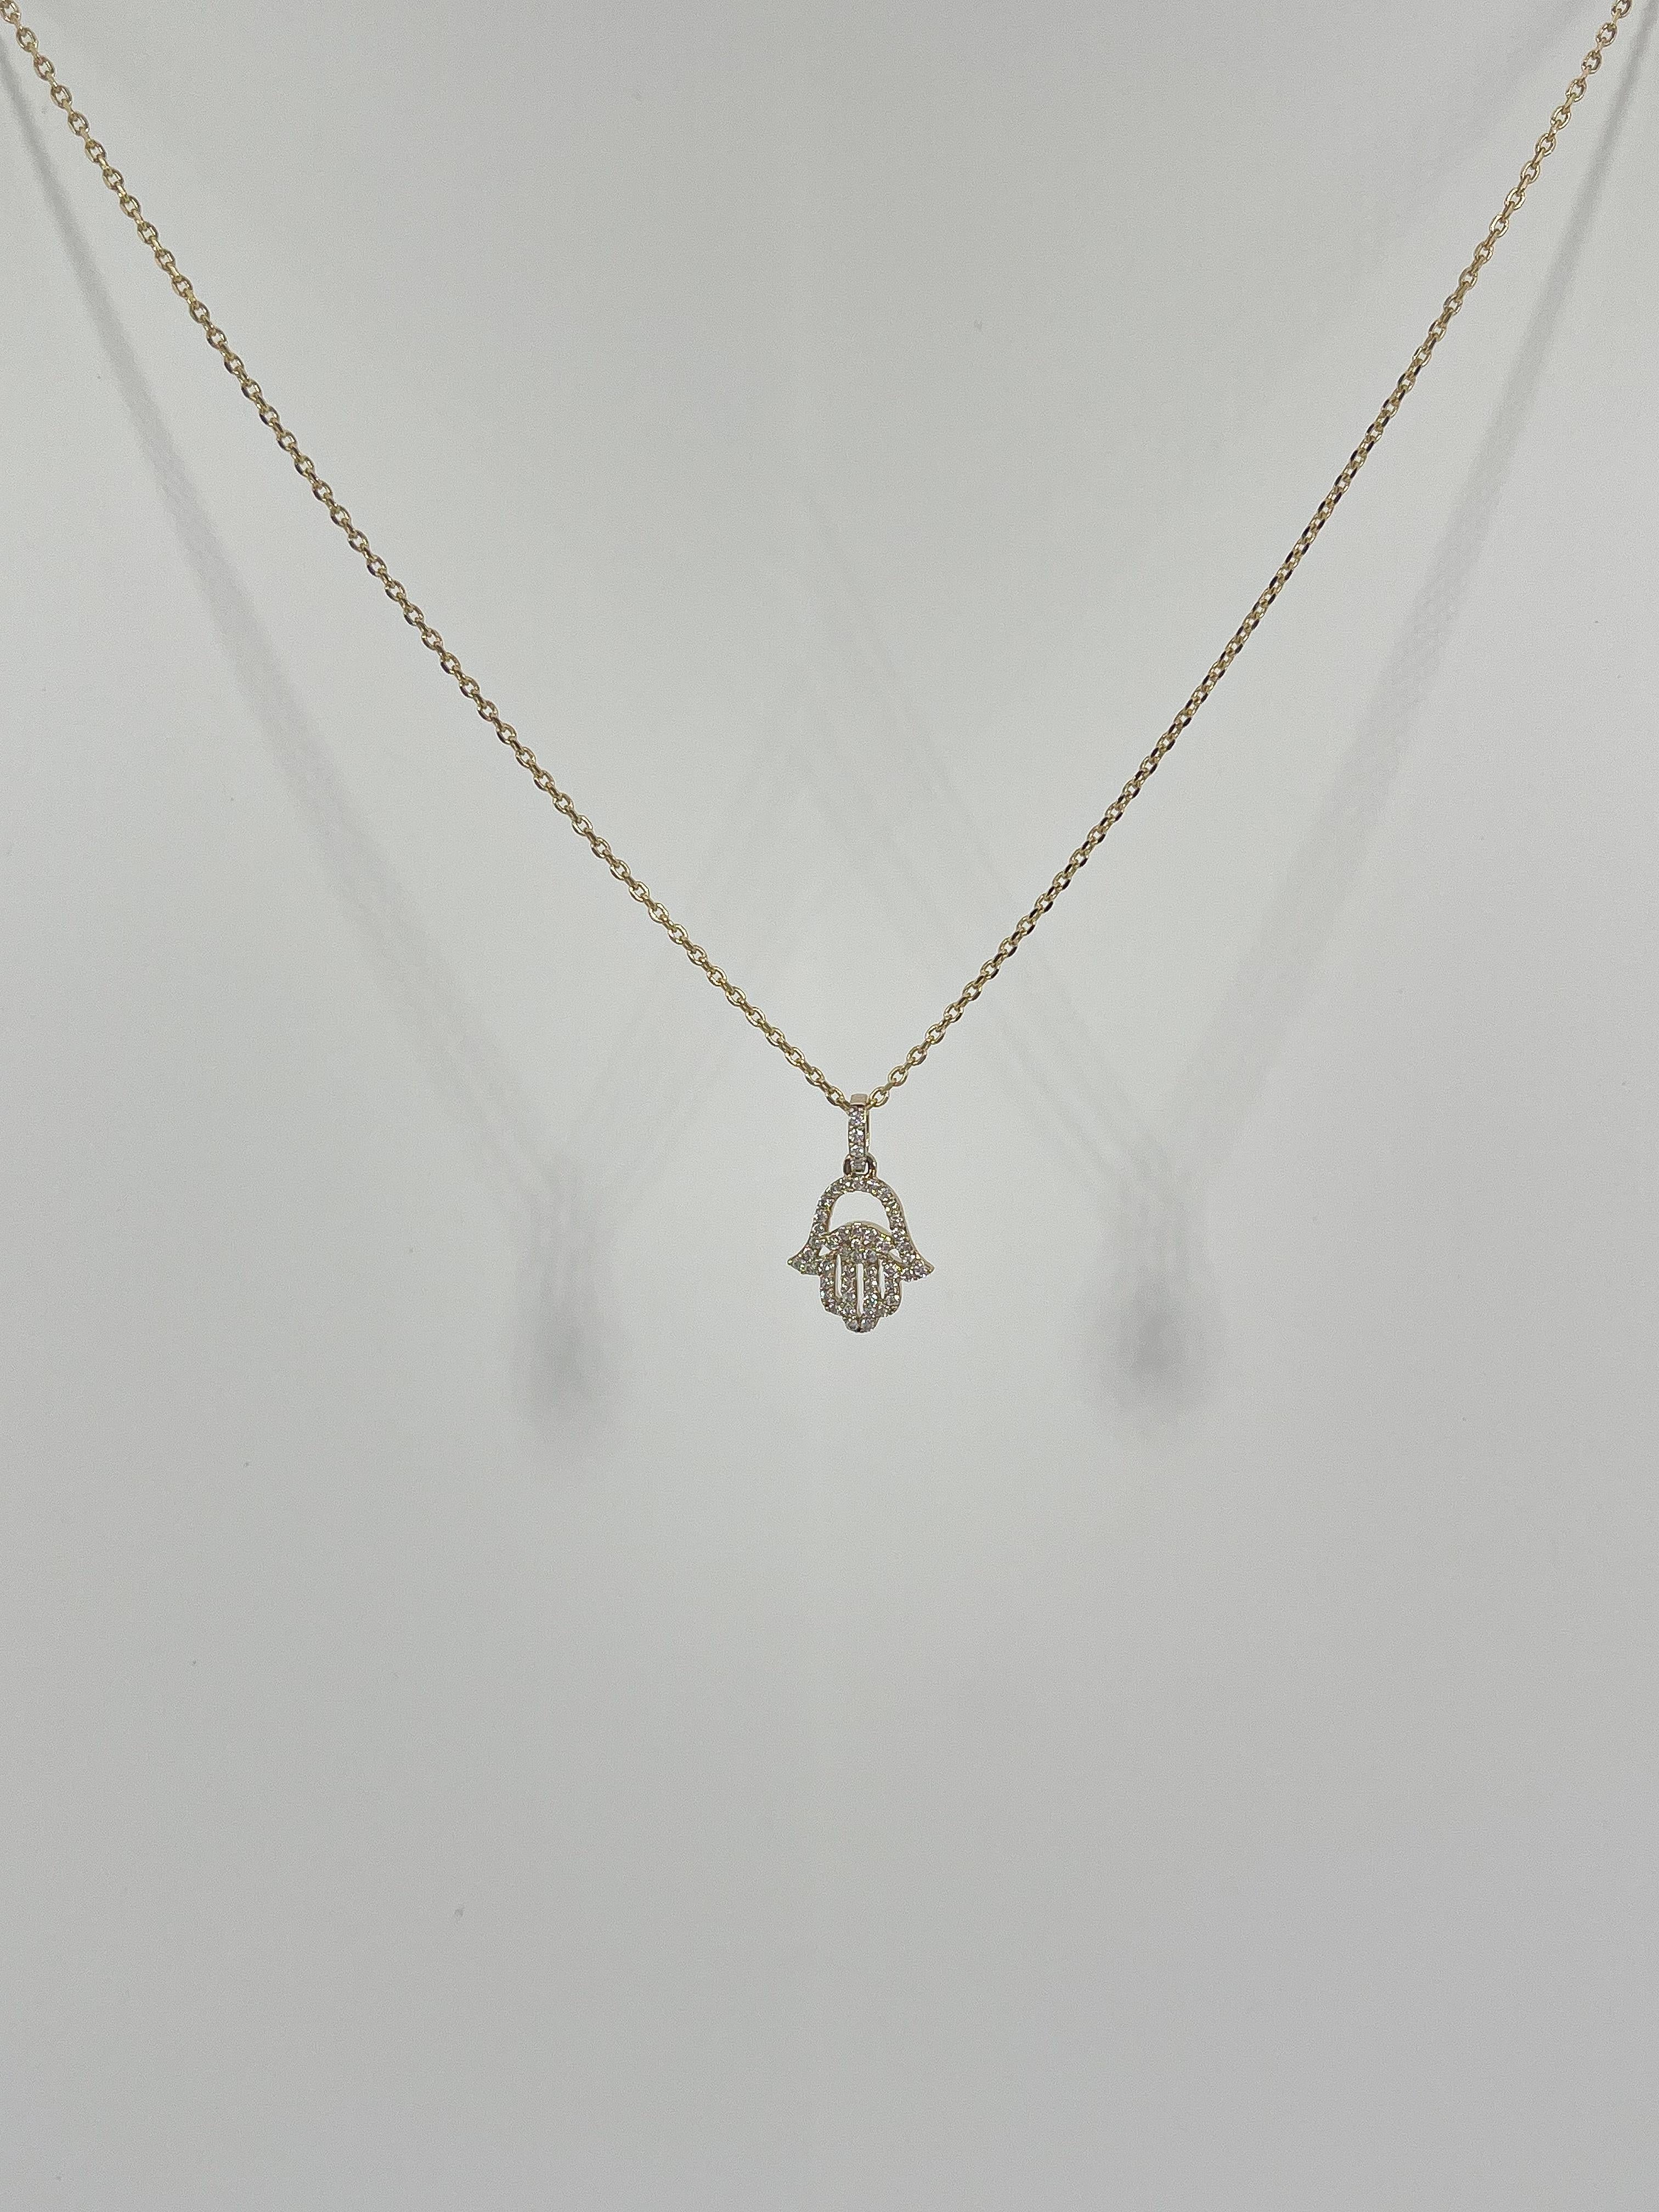 14k yellow gold .25 CTW diamond Hamsa necklace. The pendant comes on an 18 inch cable chain, and has a diamond bail. The pendant measures 9.6 x 9.2 mm and has a total weight of 2.43 grams.